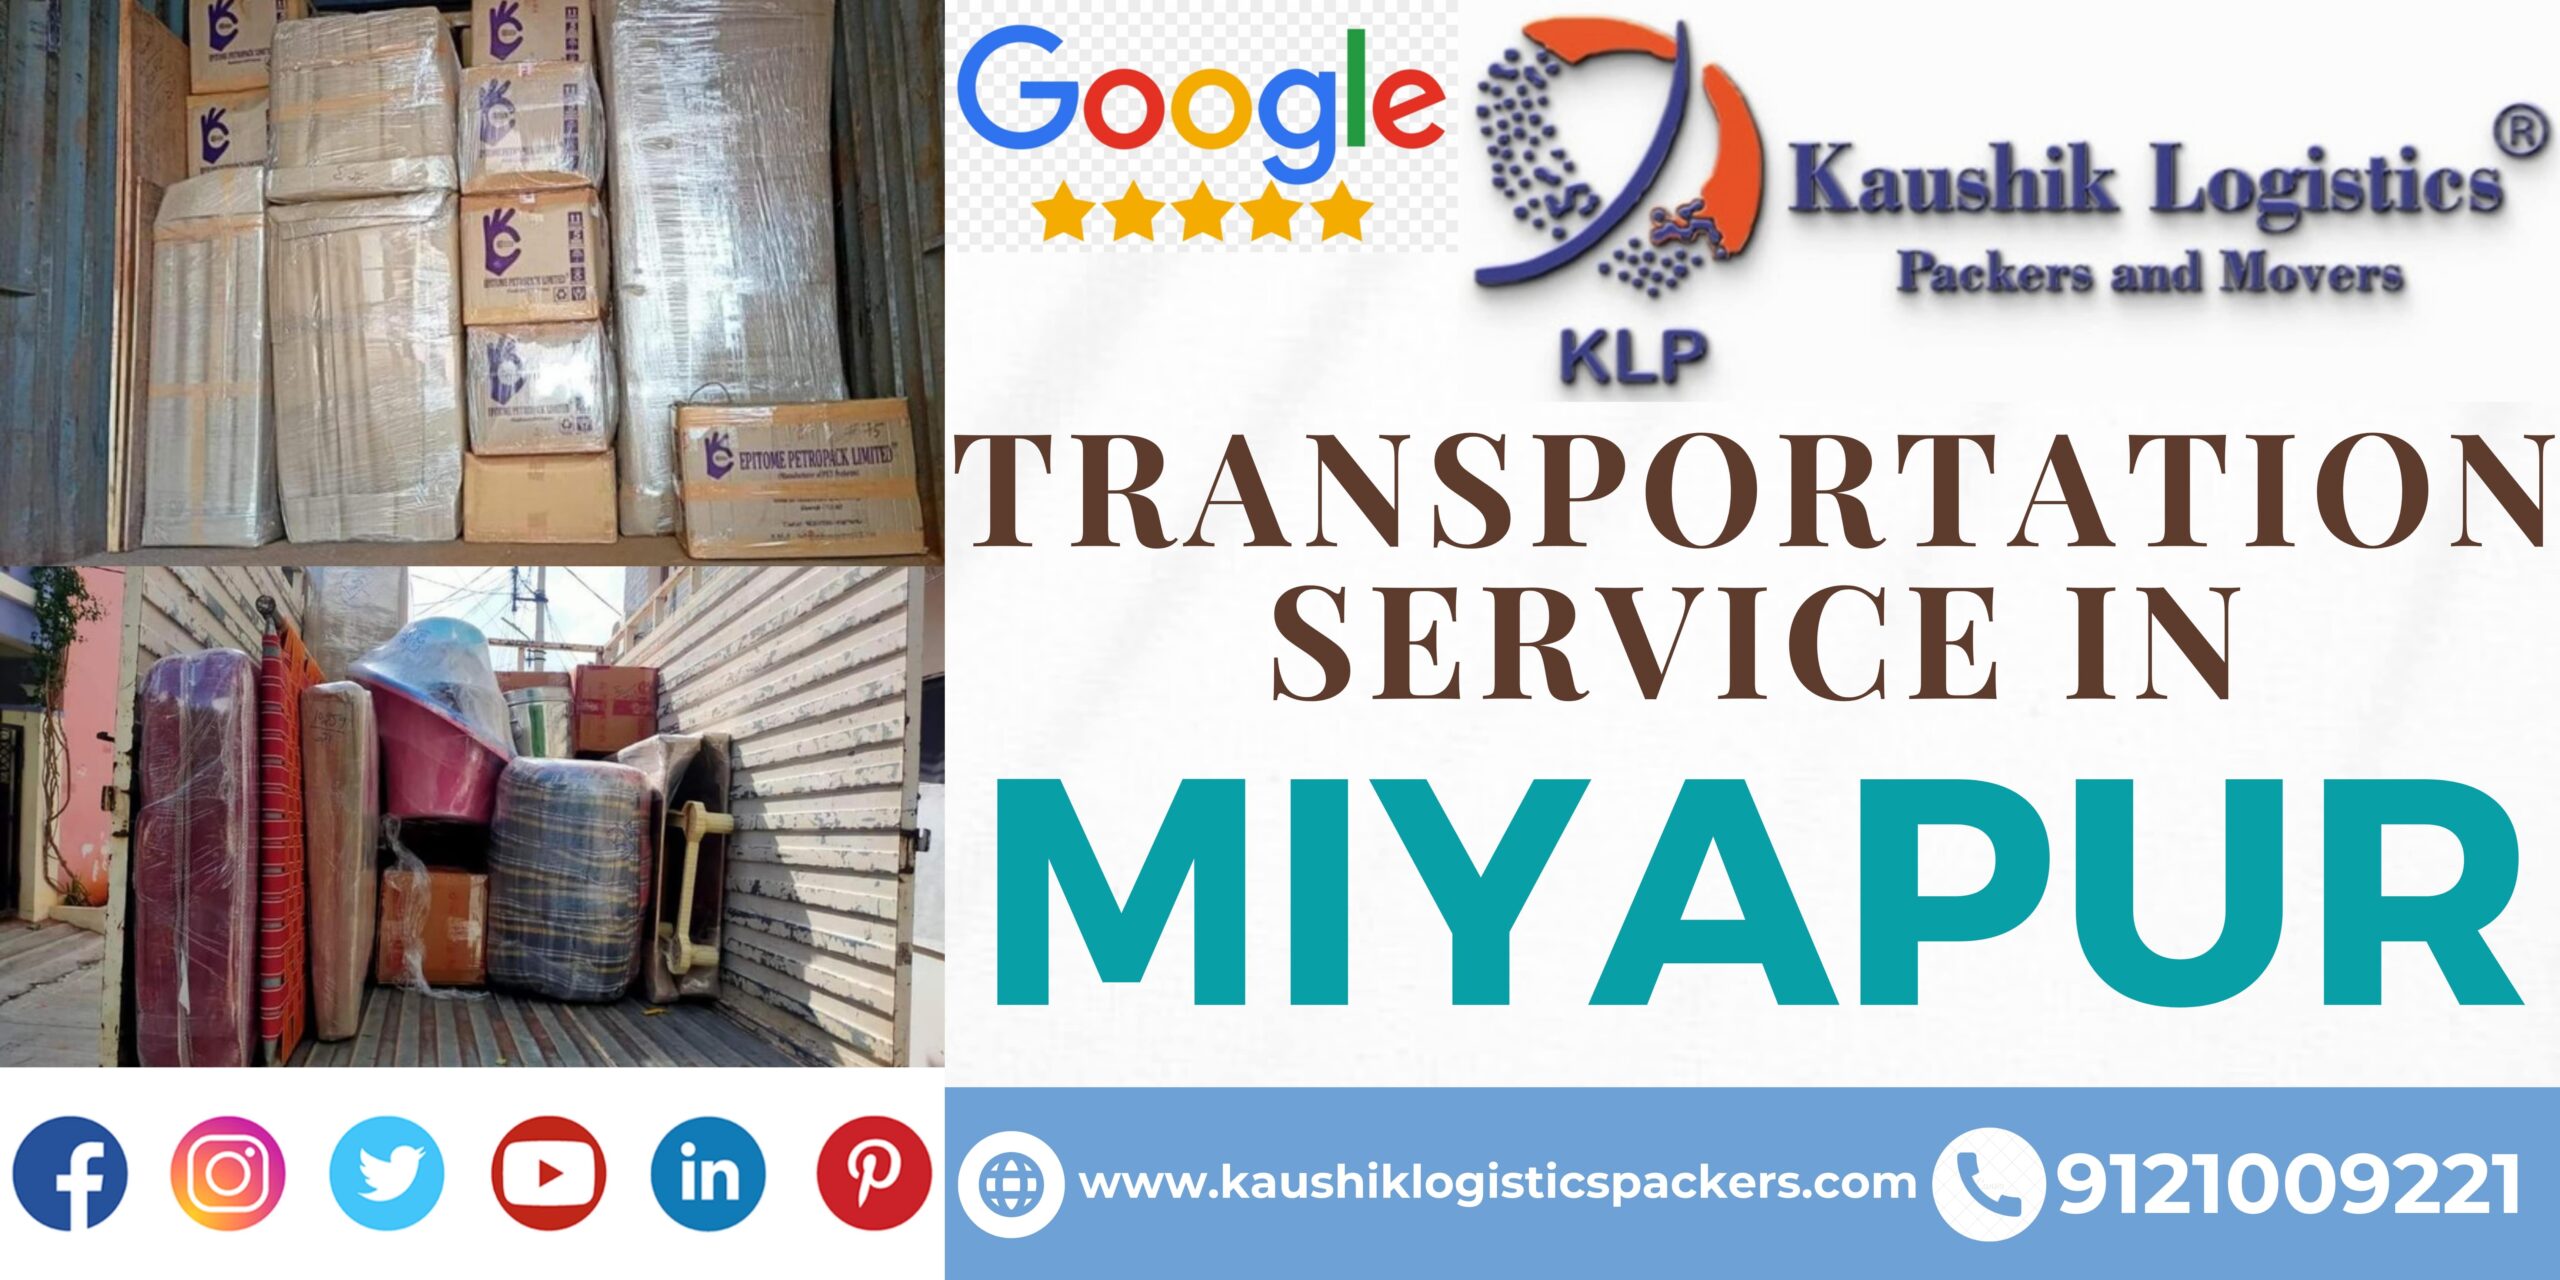 Packers and Movers In Miyapur